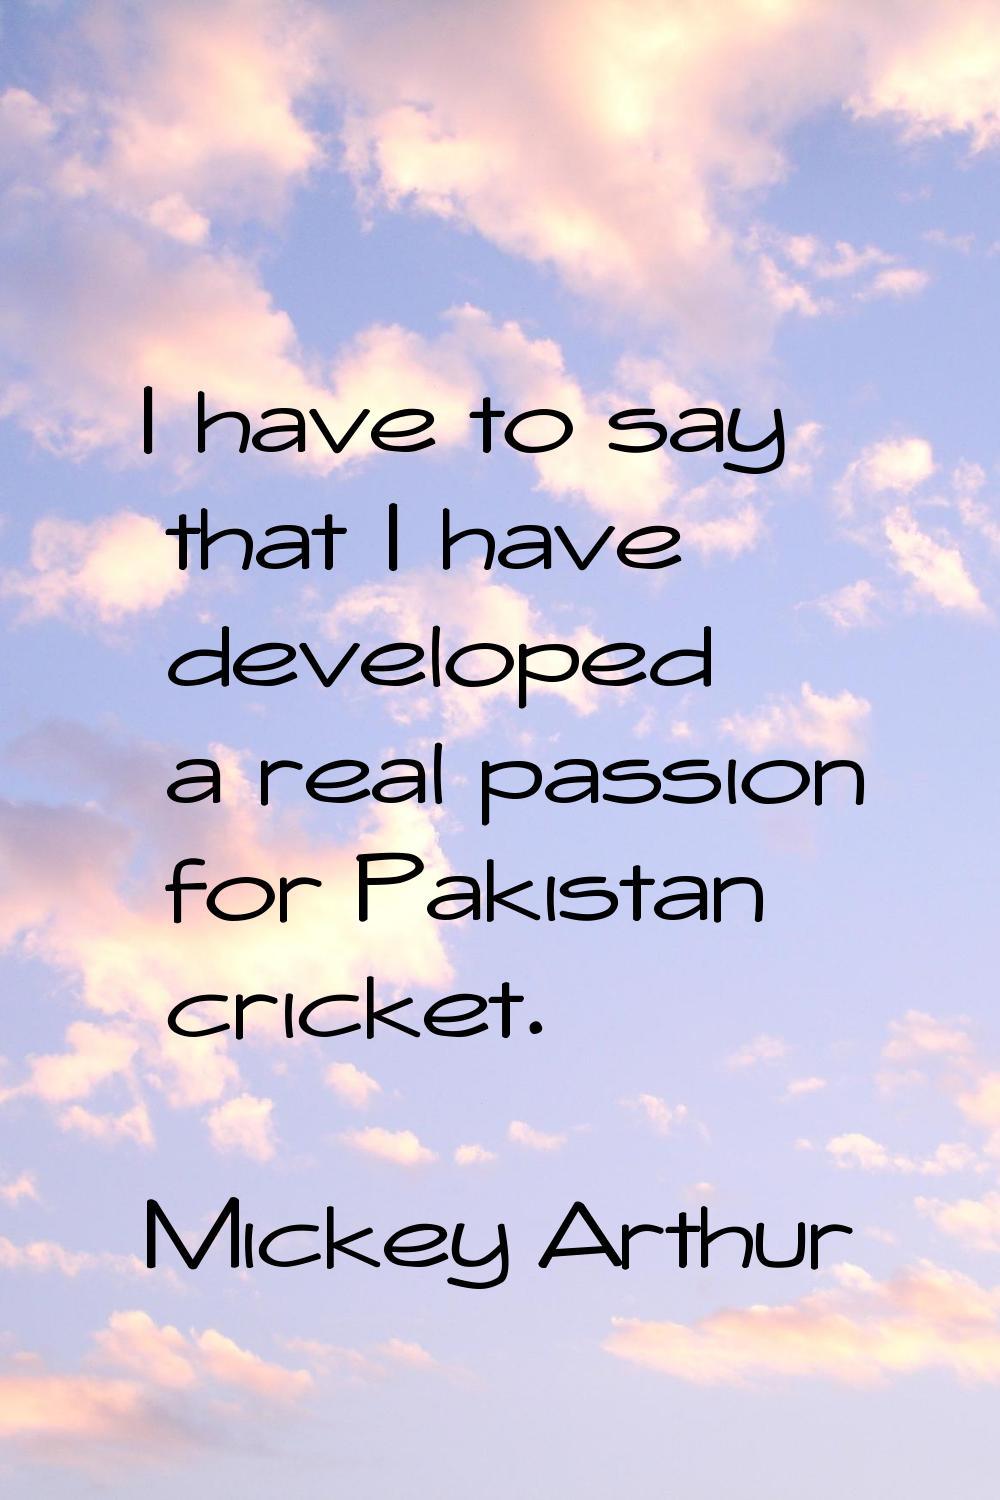 I have to say that I have developed a real passion for Pakistan cricket.